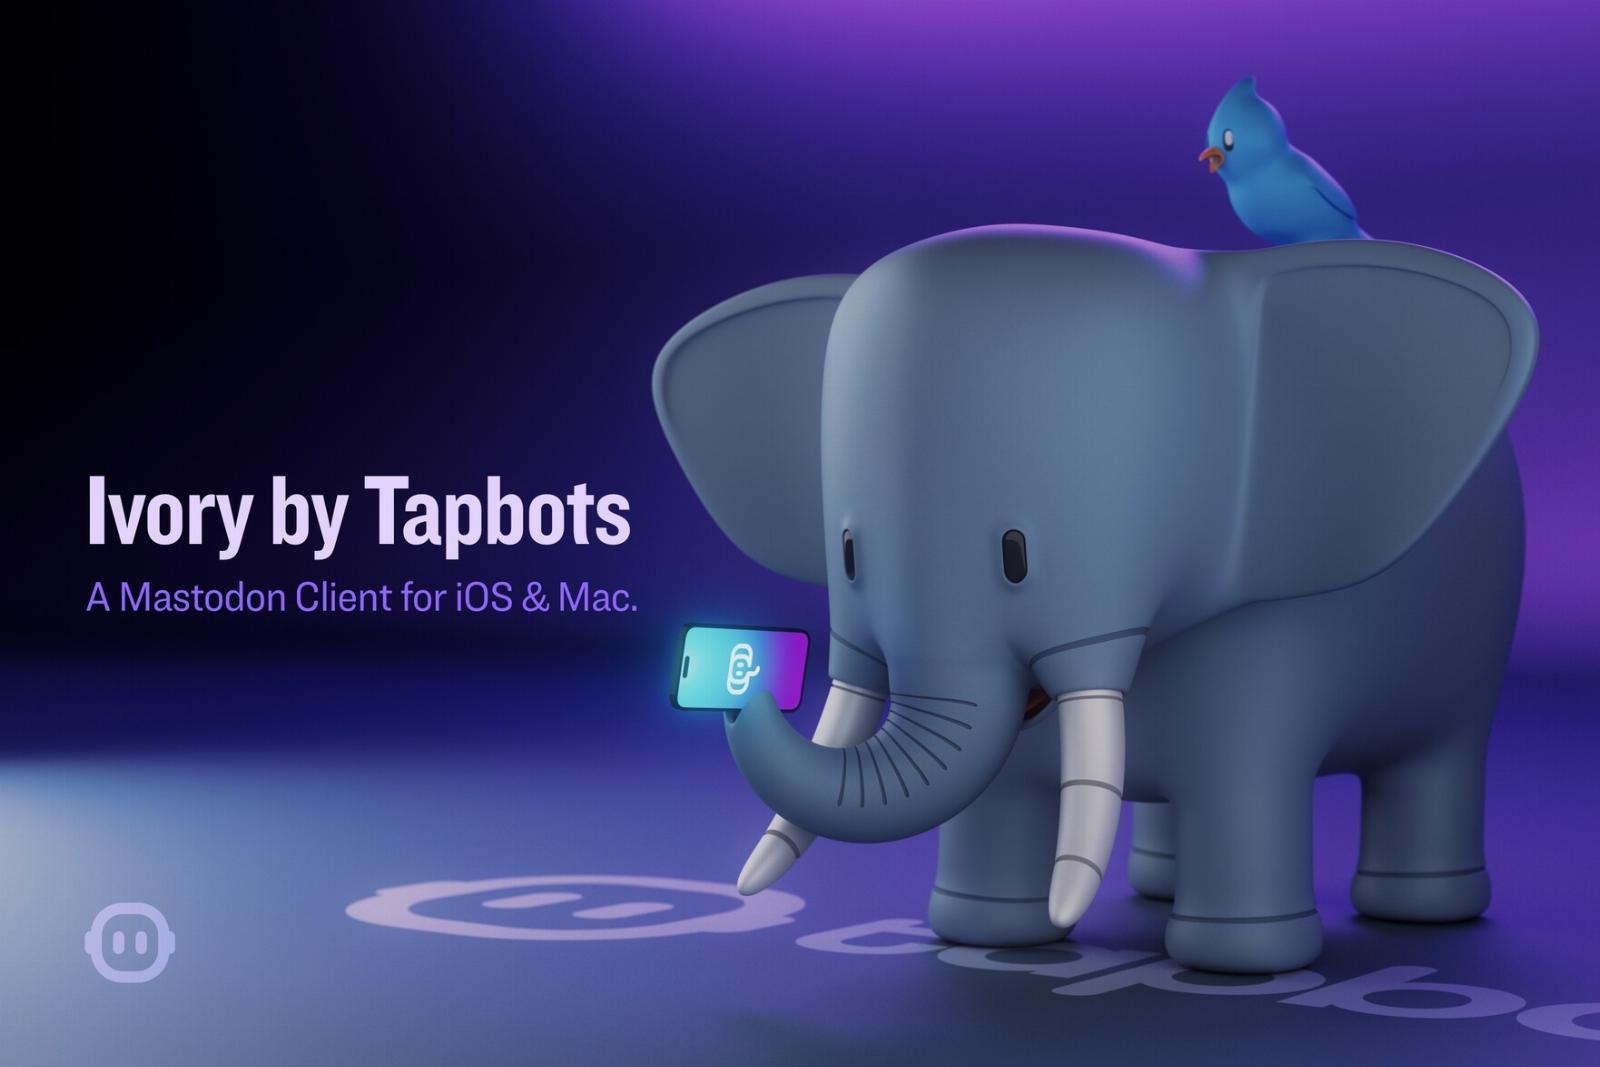 Tapbots launches a new Mastodon client, Ivory, after Twitter kills its Tweetbot app